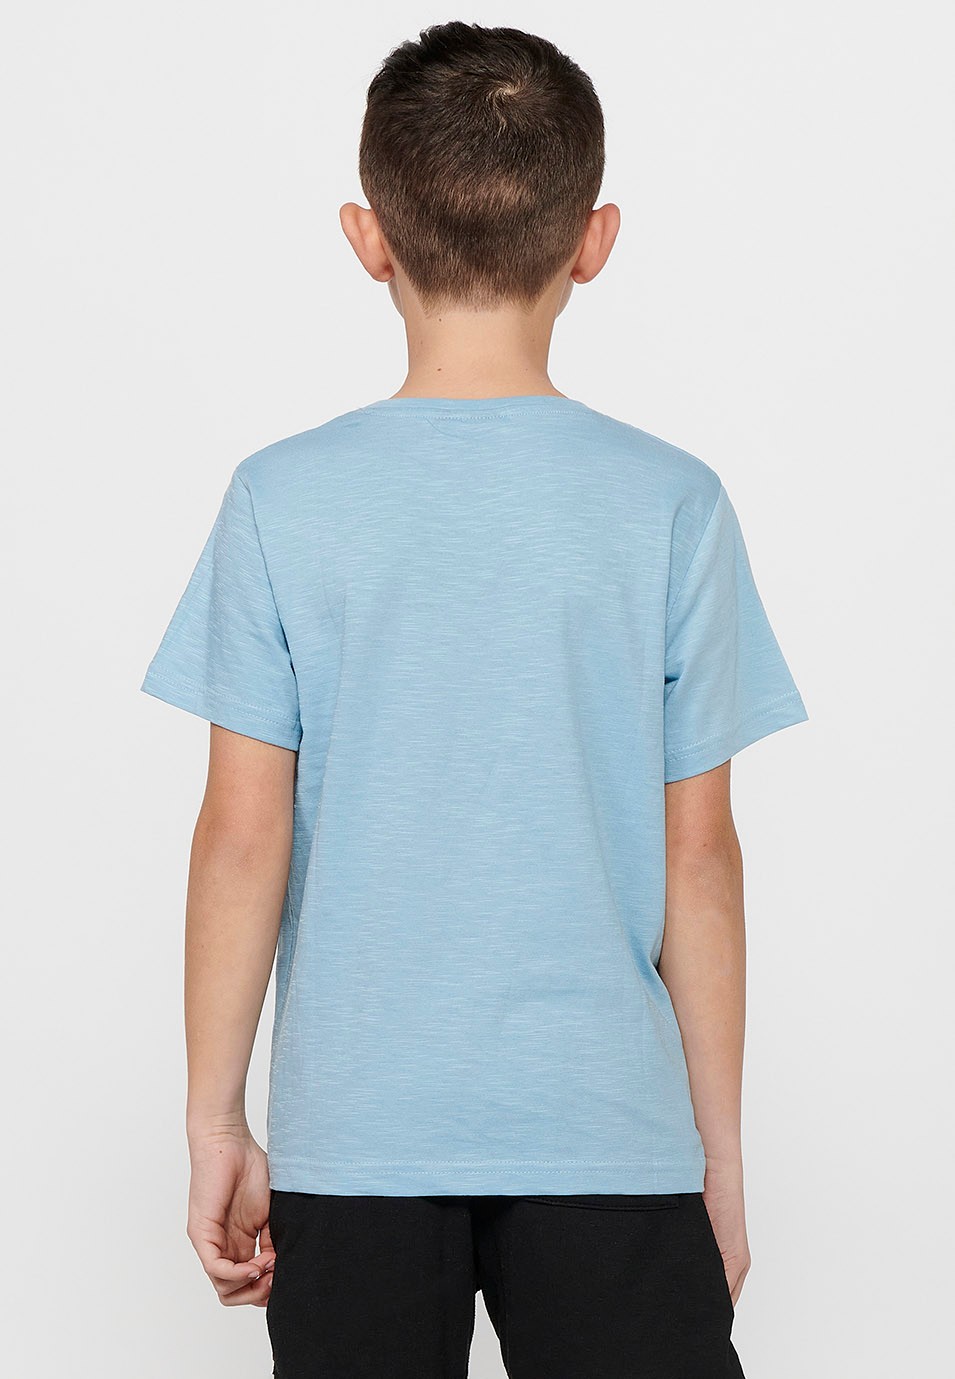 Short-sleeved cotton T-shirt with a round neckline. Front print Color Light blue for Boys 5